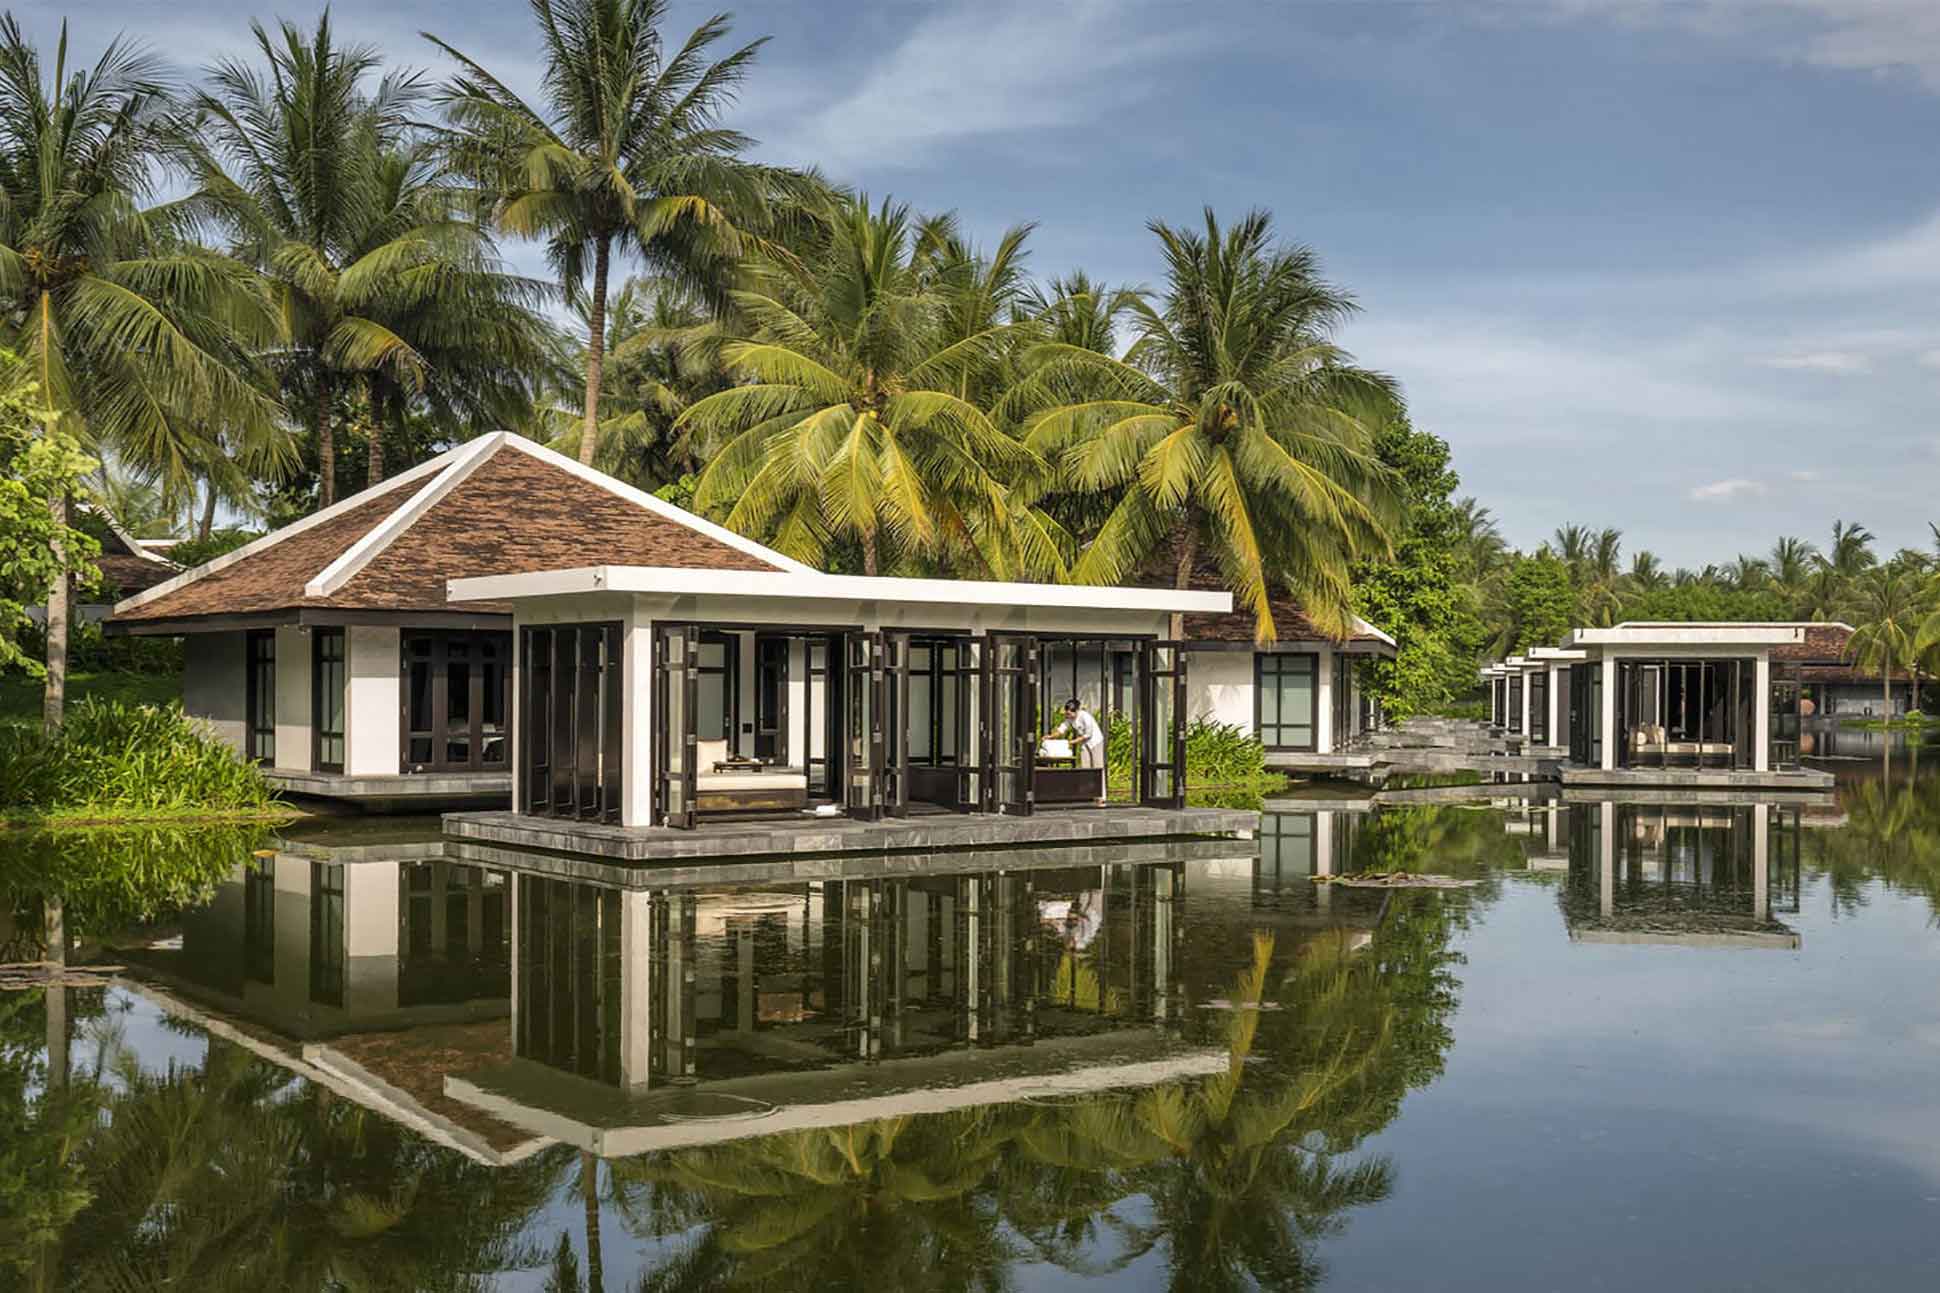 TOP 20+ LUXURY HOTELS TO STAY IN VIETNAM 2022 (MUST TRY BY TRAVELLERS)